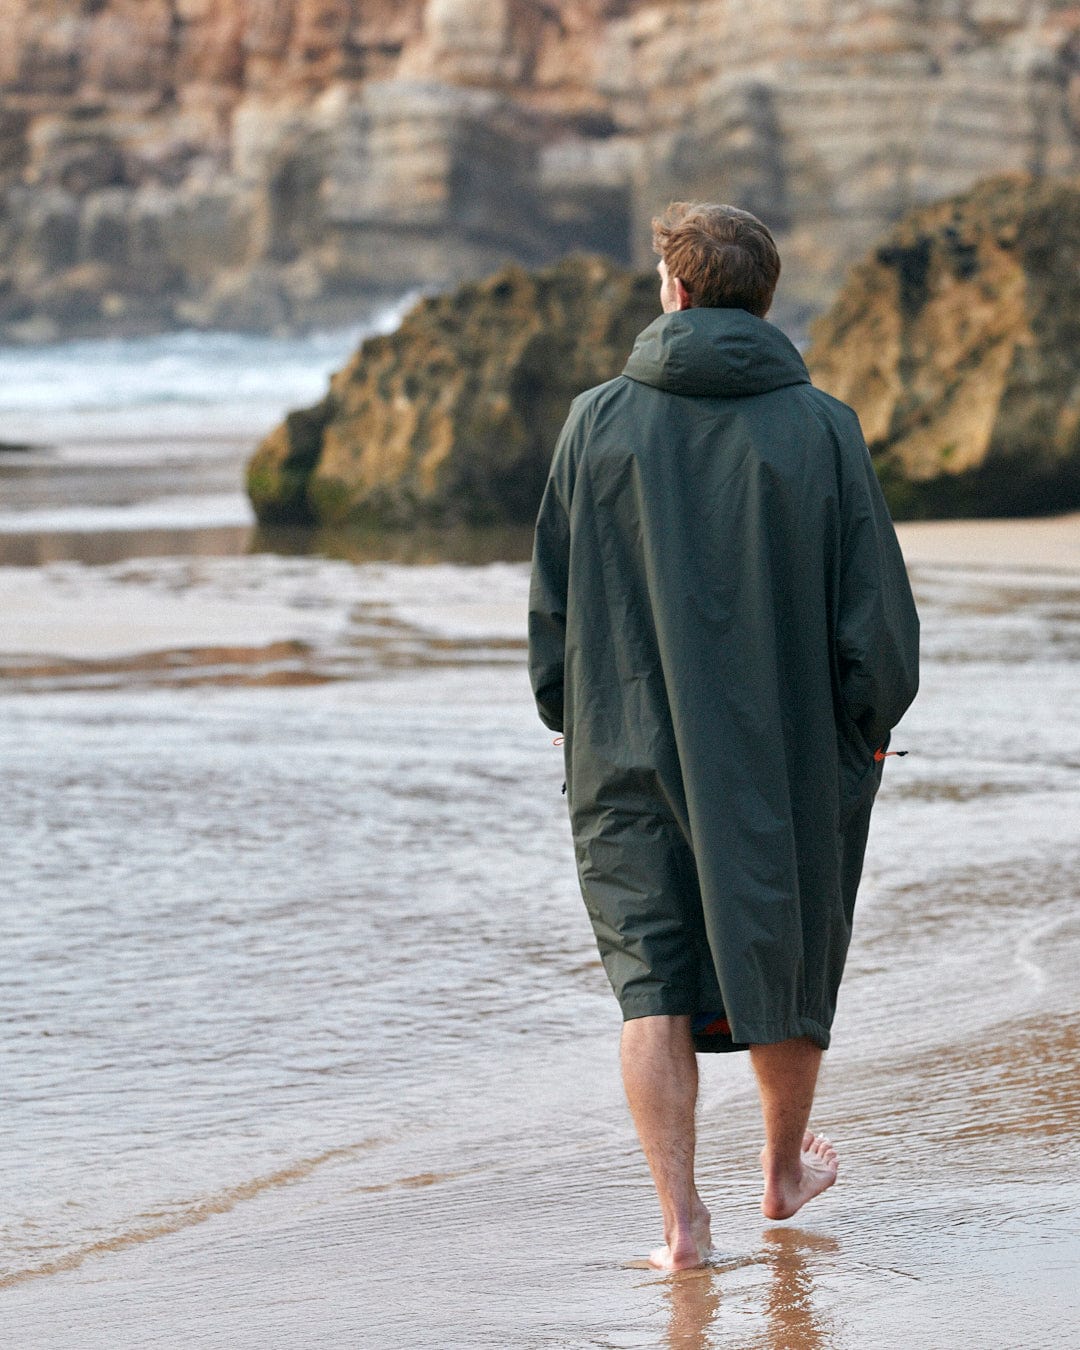 A person walking alone along a sandy beach with waves gently breaking at the shore, wearing a Saltrock jacket with fleece lining.